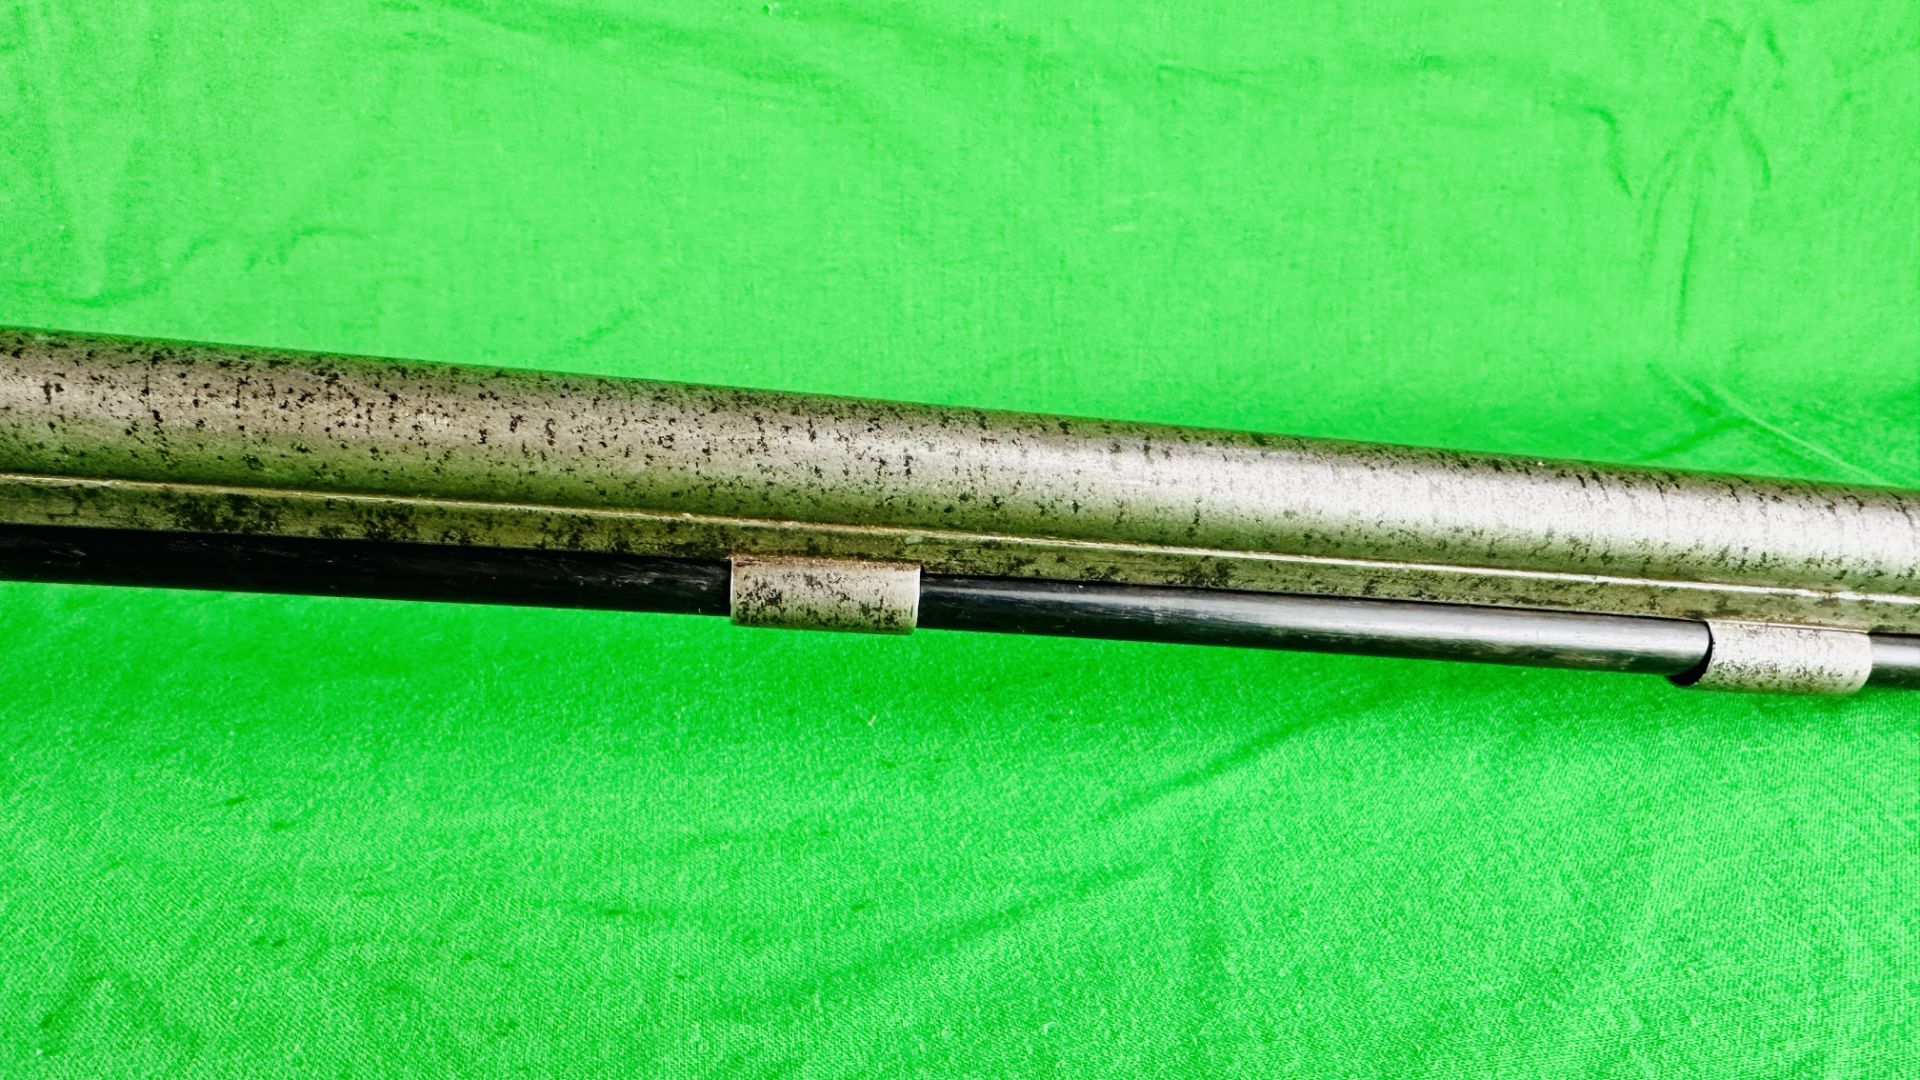 ANTIQUE PERCUSSION CAP MUZZLE LOADING RIFLE WITH LOADING ROD, - Image 13 of 21